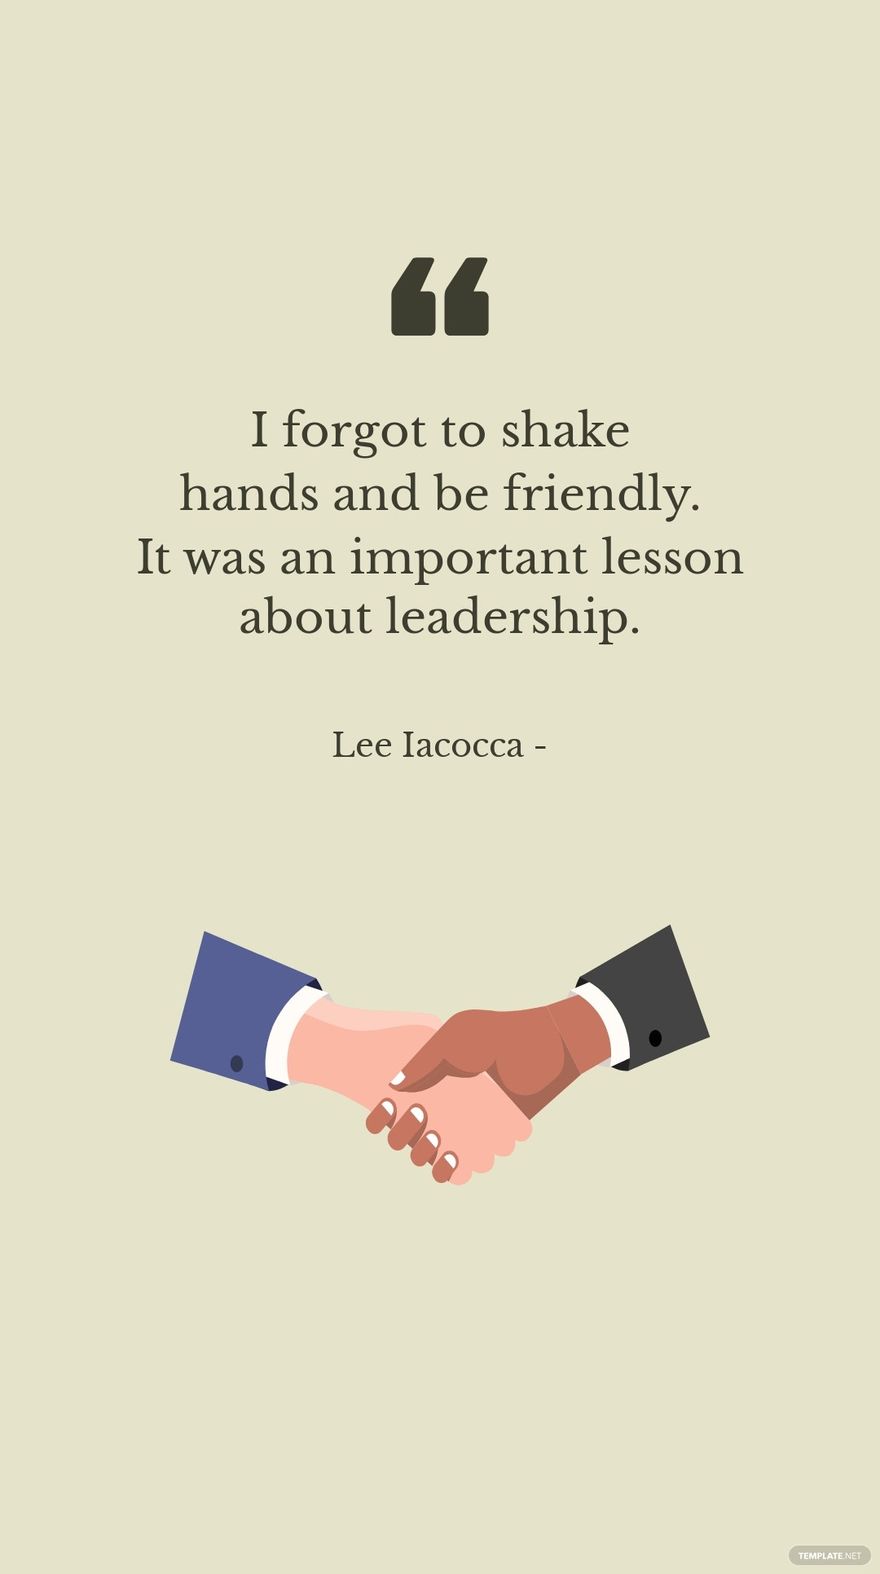 Free Lee Iacocca - I forgot to shake hands and be friendly. It was an important lesson about leadership. in JPG